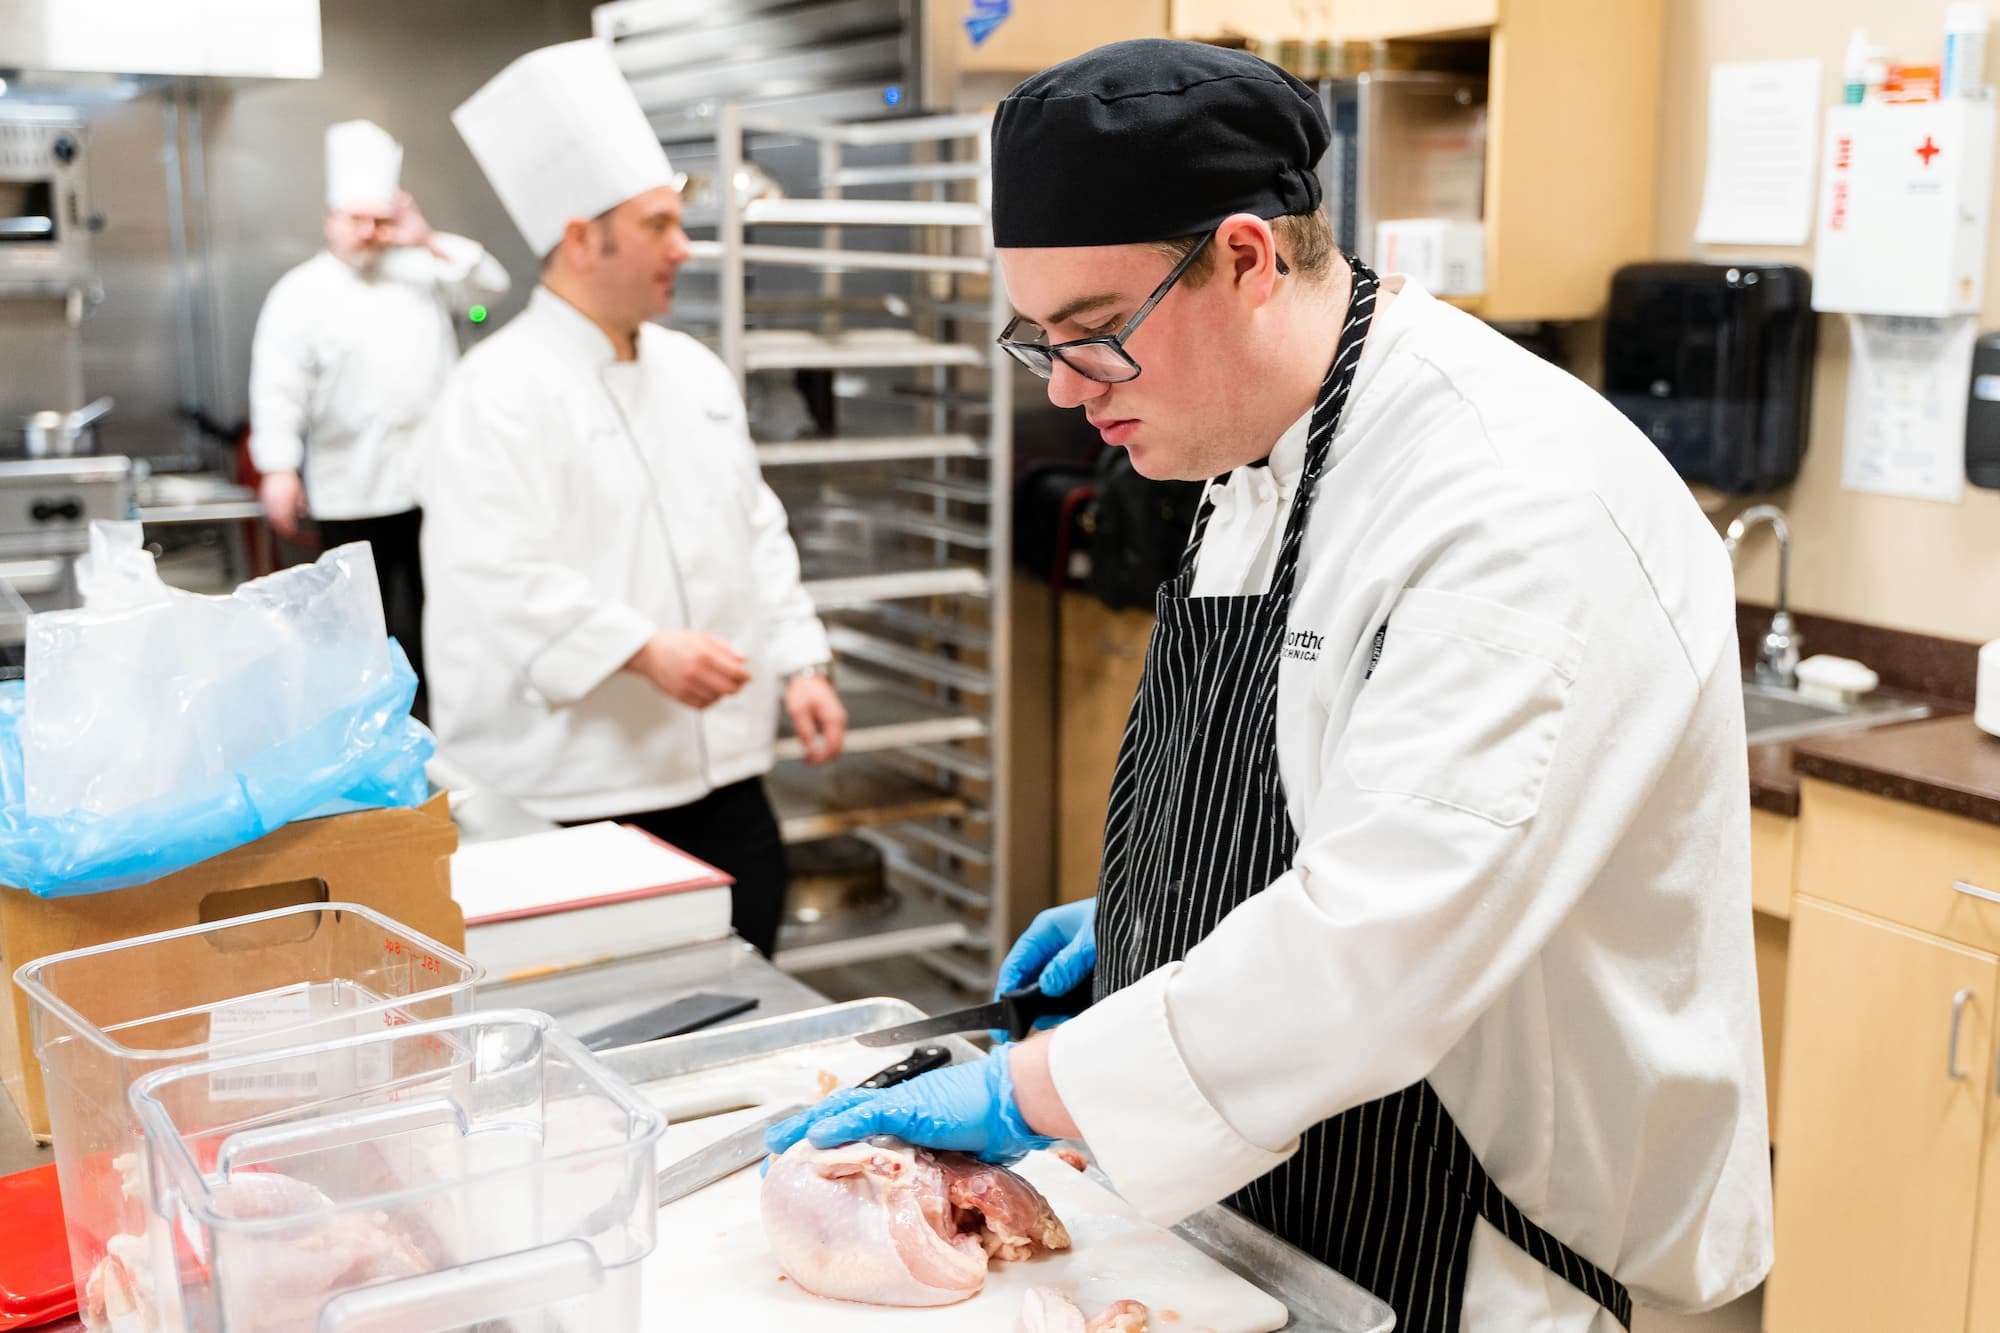 A student switches to a small carving knife to finish dividing a raw, whole chicken.